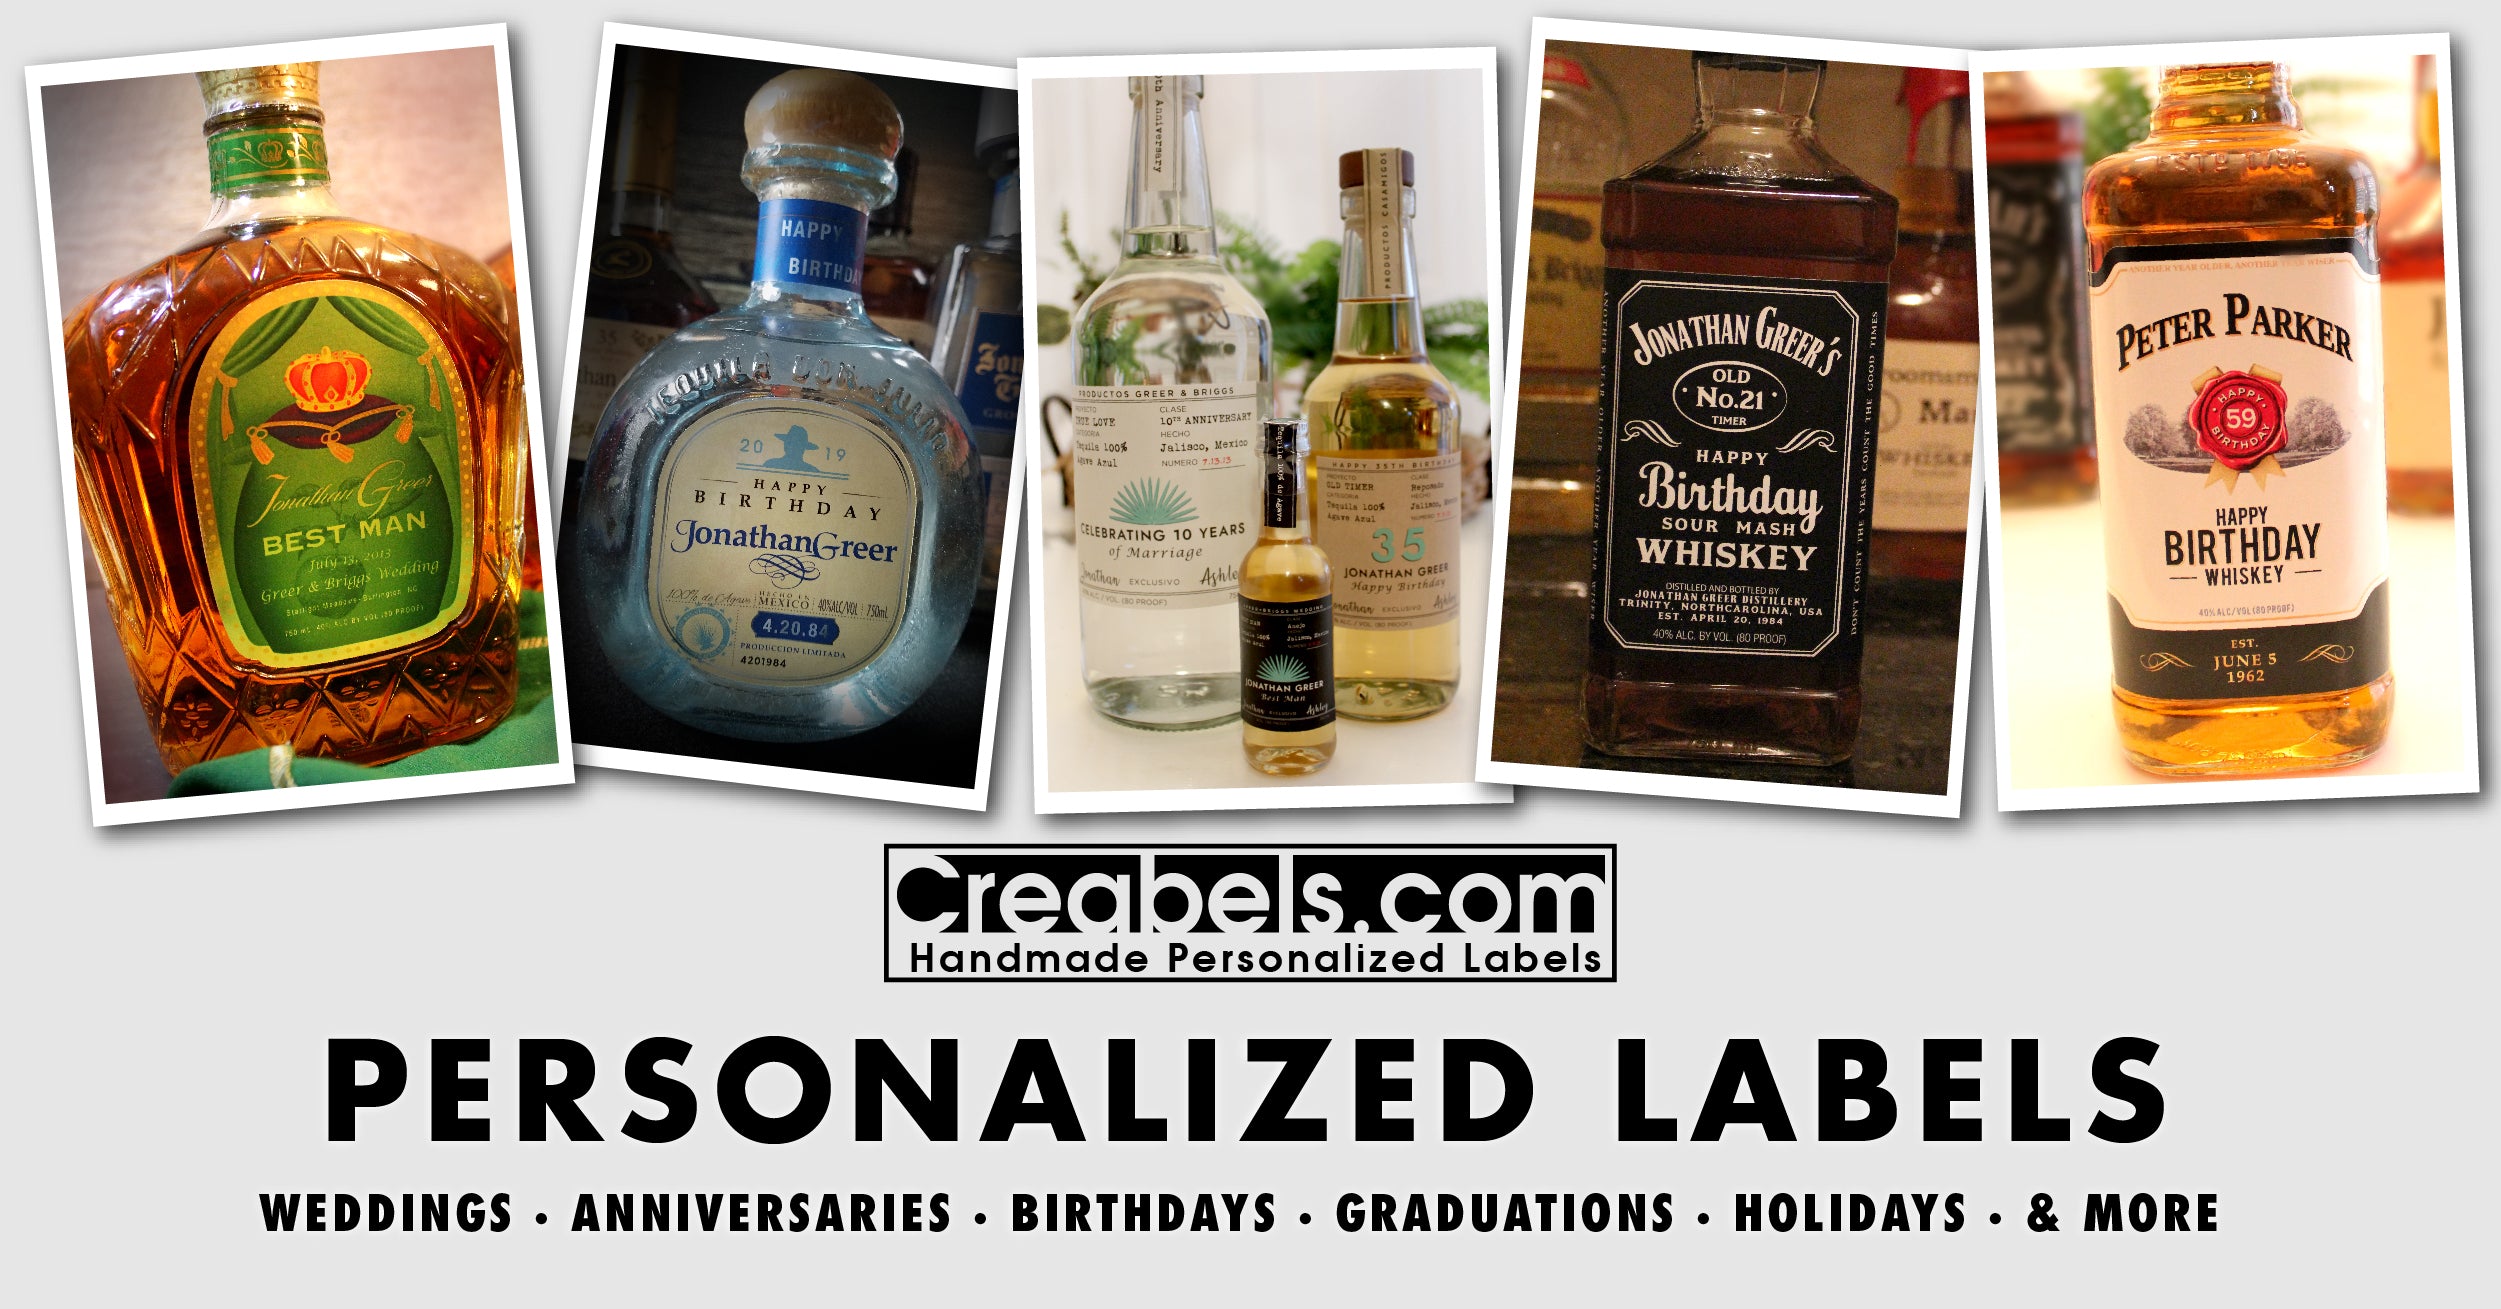 Creabels: Personalized Labels